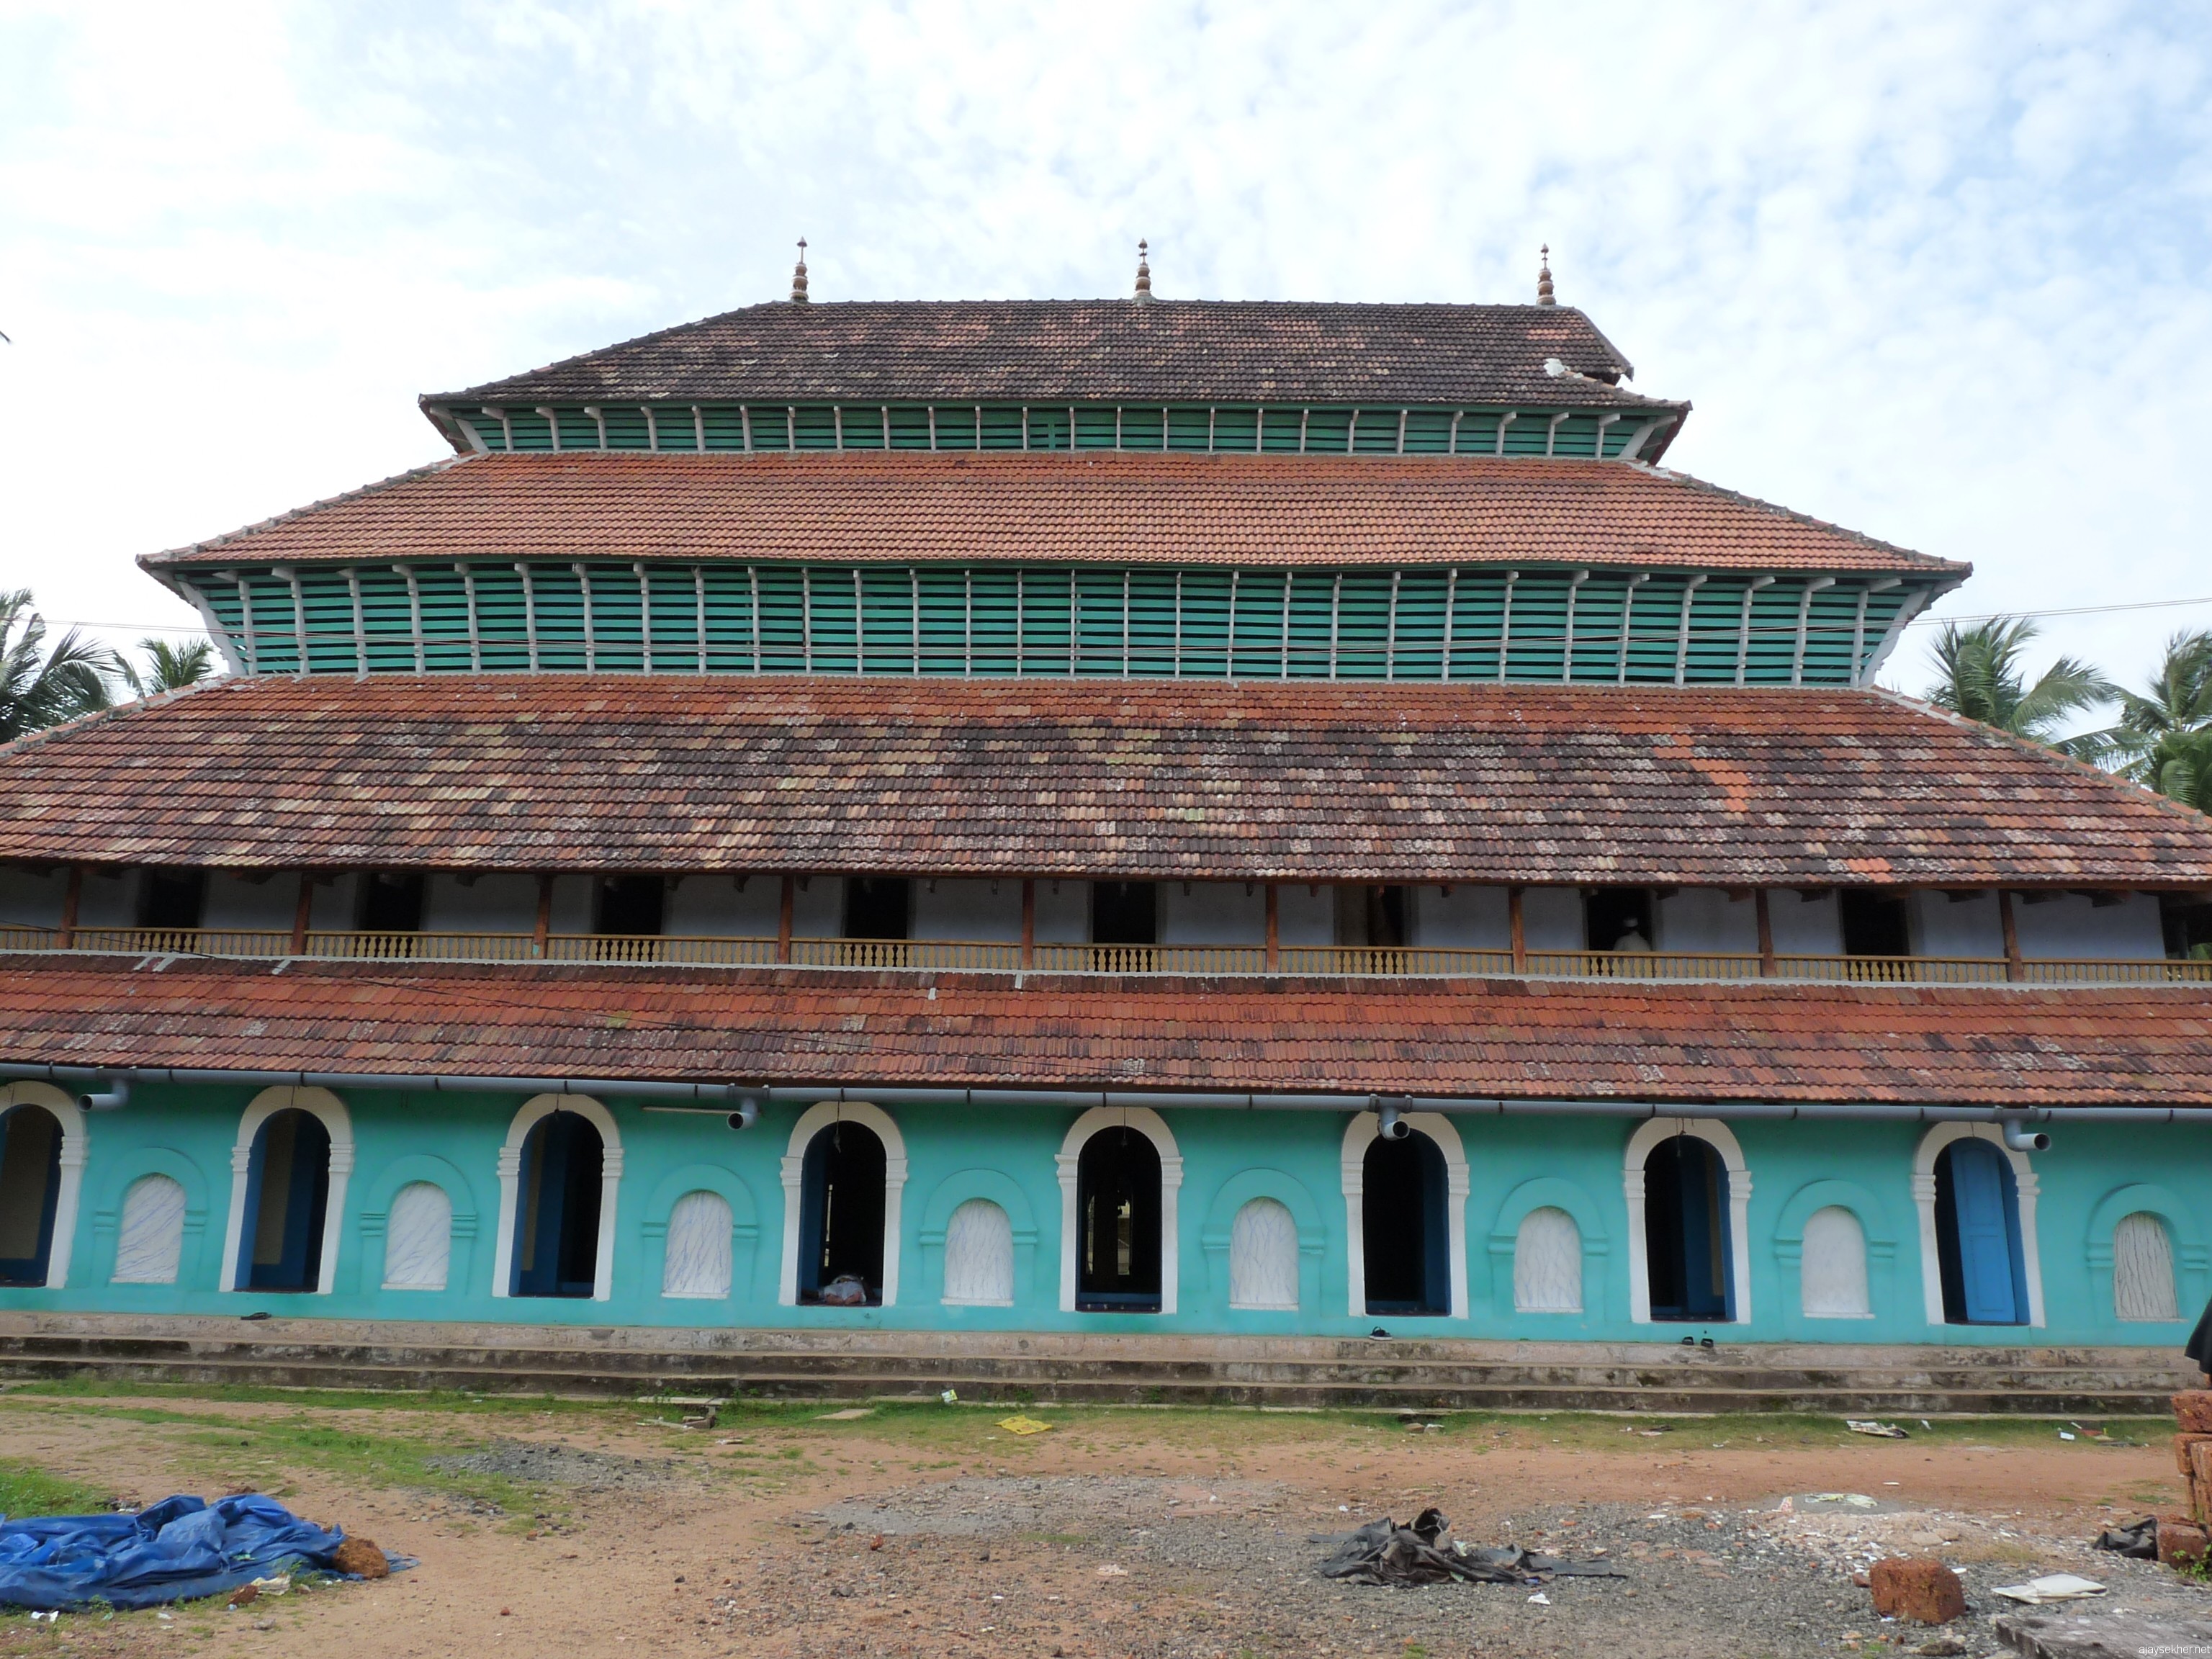 Mishkal Pally, Kutichira, Calicut. View from the south. Built in the 14th century by an Arab trader Mishkal according to legend.